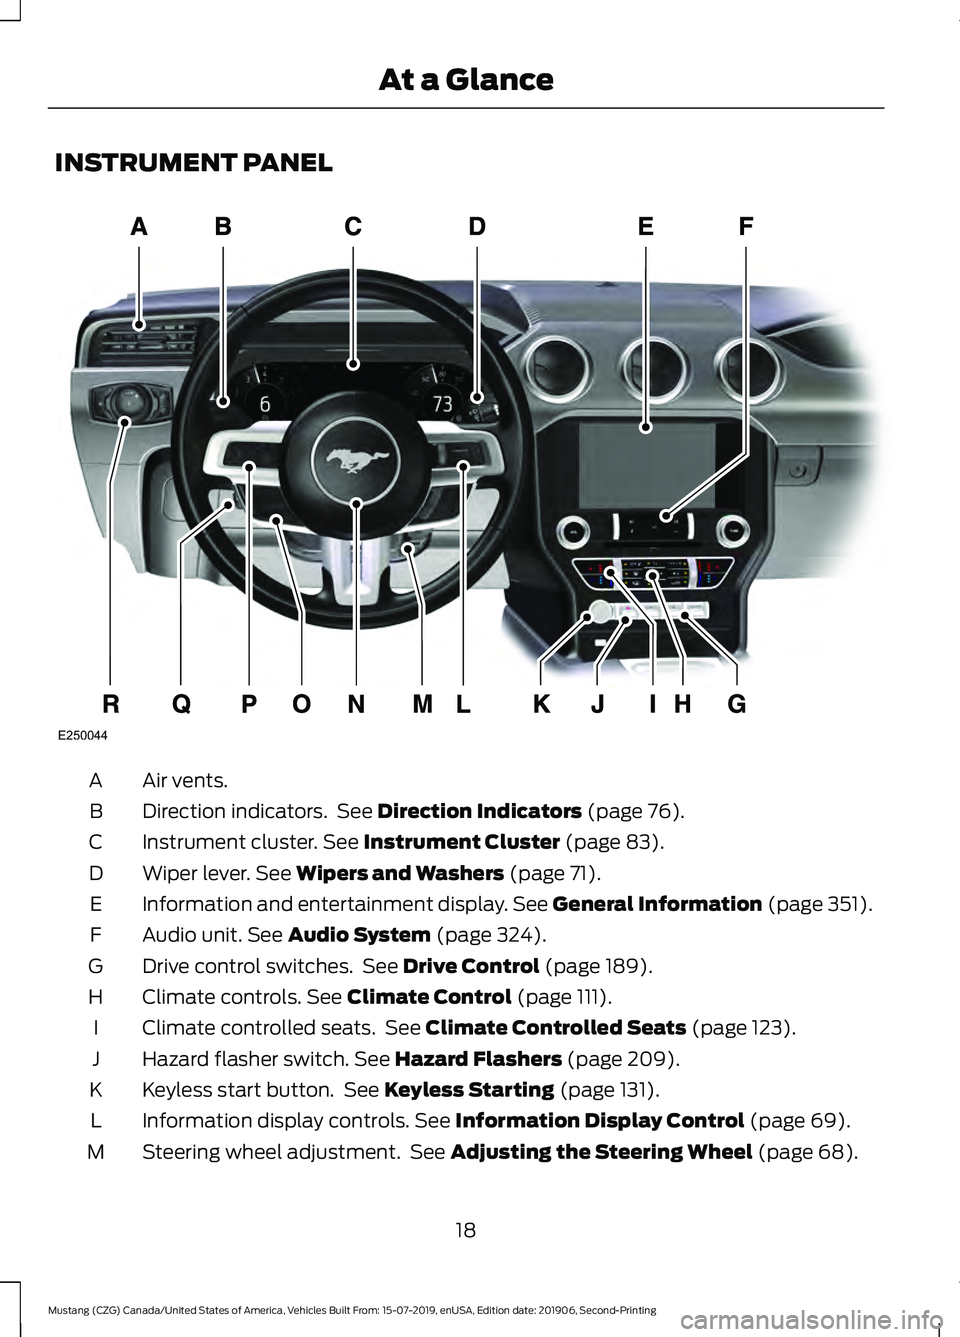 FORD MUSTANG 2020  Owners Manual INSTRUMENT PANEL
Air vents.
A
Direction indicators.  See Direction Indicators (page 76).
B
Instrument cluster.
 See Instrument Cluster (page 83).
C
Wiper lever.
 See Wipers and Washers (page 71).
D
In